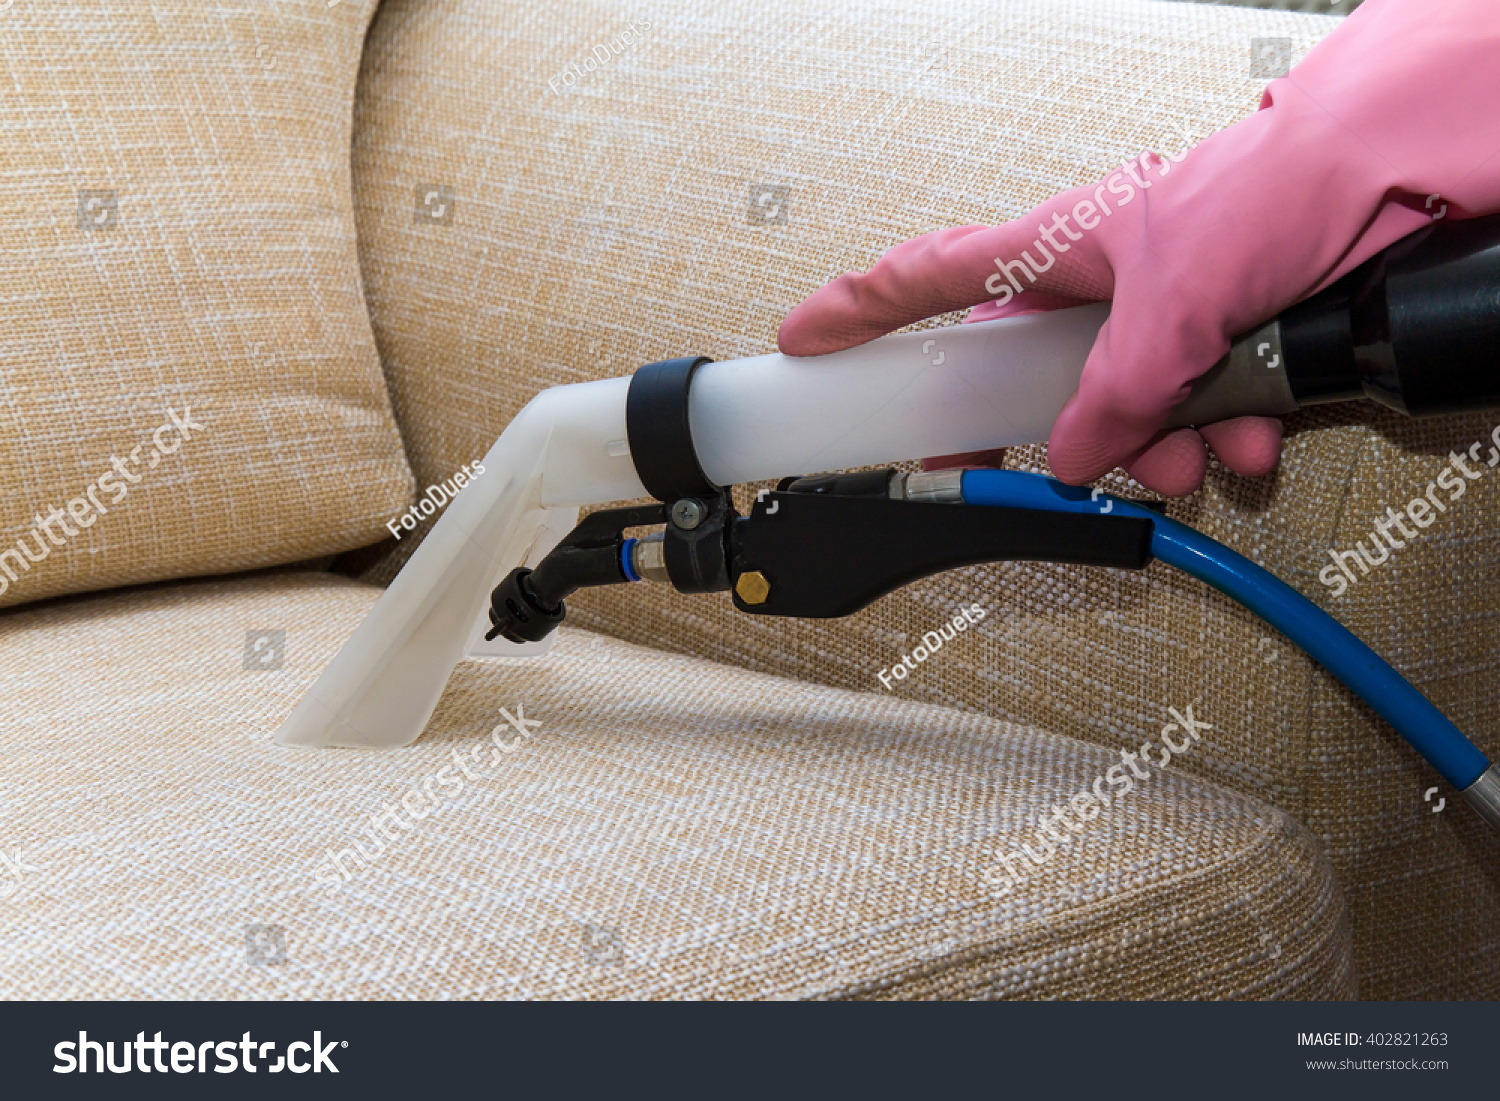 Sofa or armchair chemical cleaning with professionally extraction method. Upholstered furniture. Early spring cleaning or regular clean up.
 #402821263